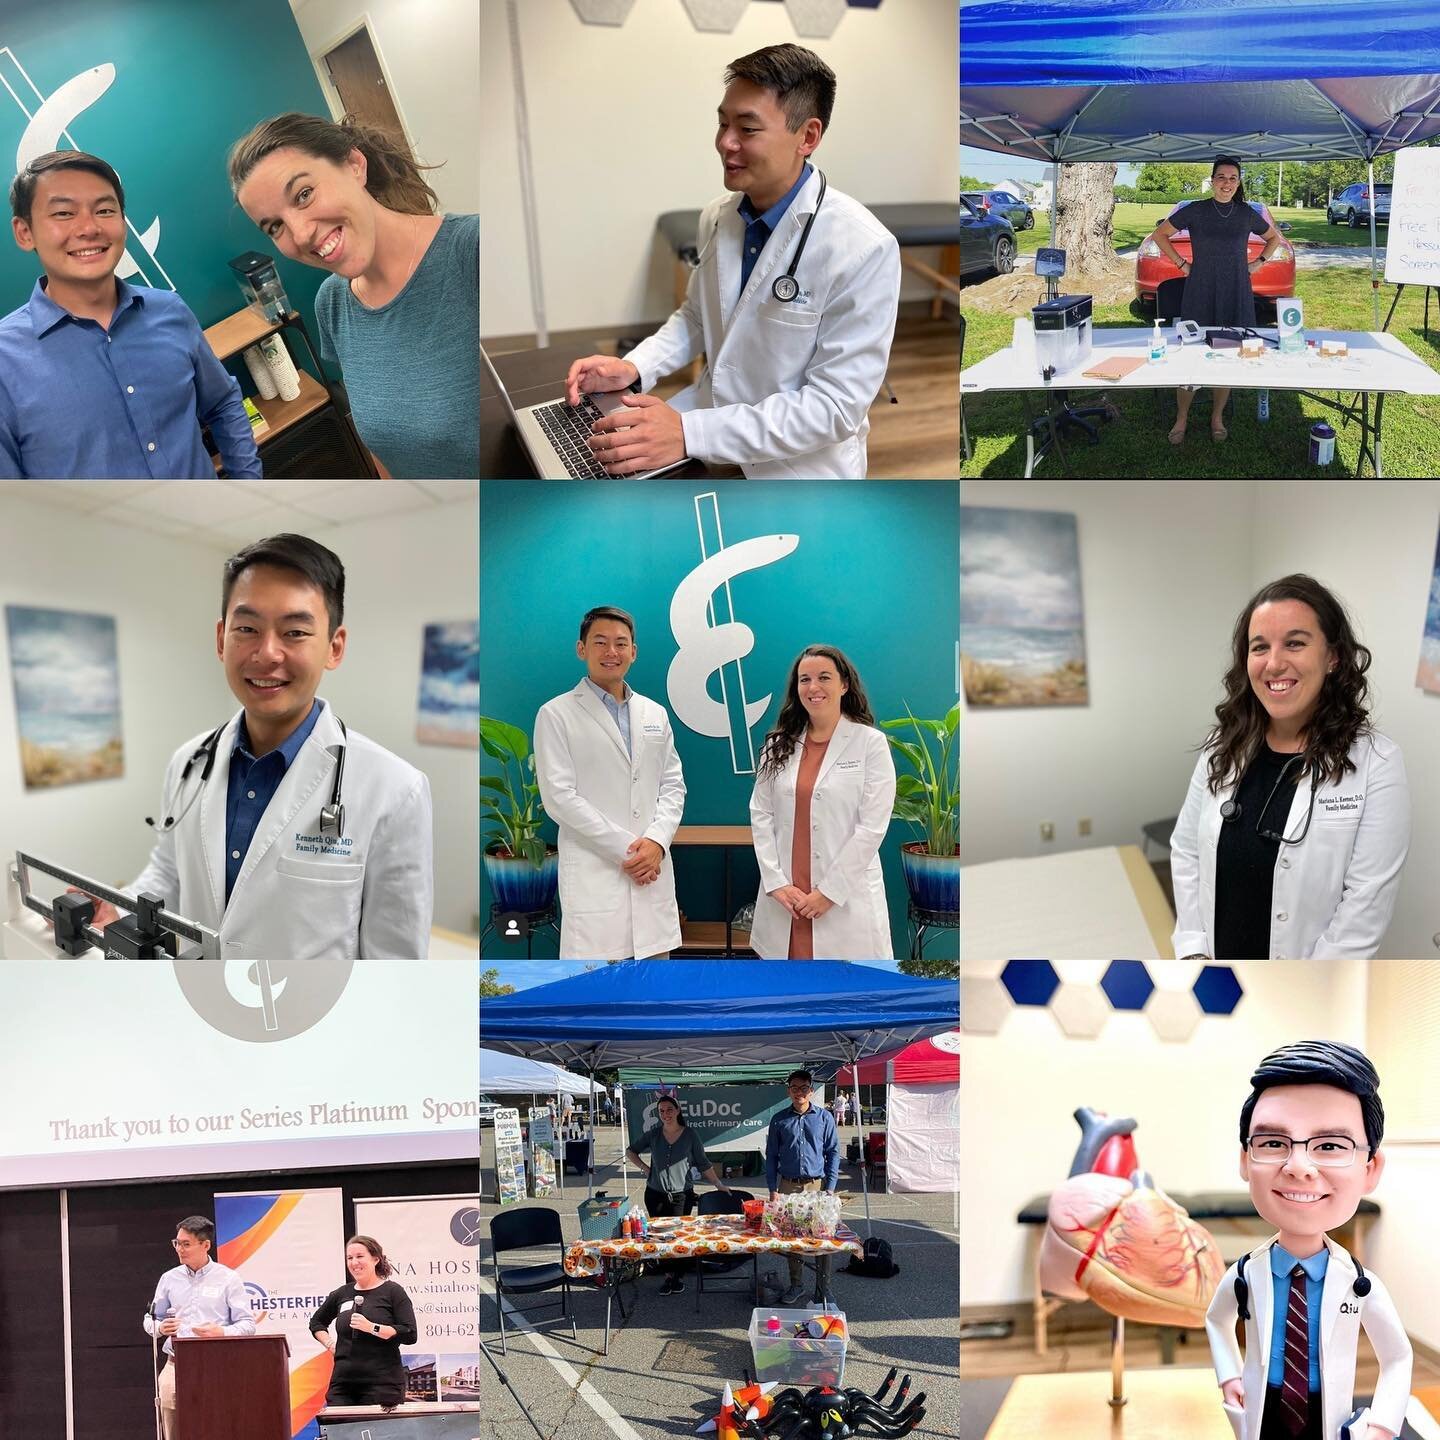 ONE YEAR! 🎉🎉 It&rsquo;s officially been one year since we opened! 

We couldn&rsquo;t say thank you enough to our patients as well as the community that has supported us in our goal of bringing exceptional primary care to everyone! 
.
.
.
#richmond